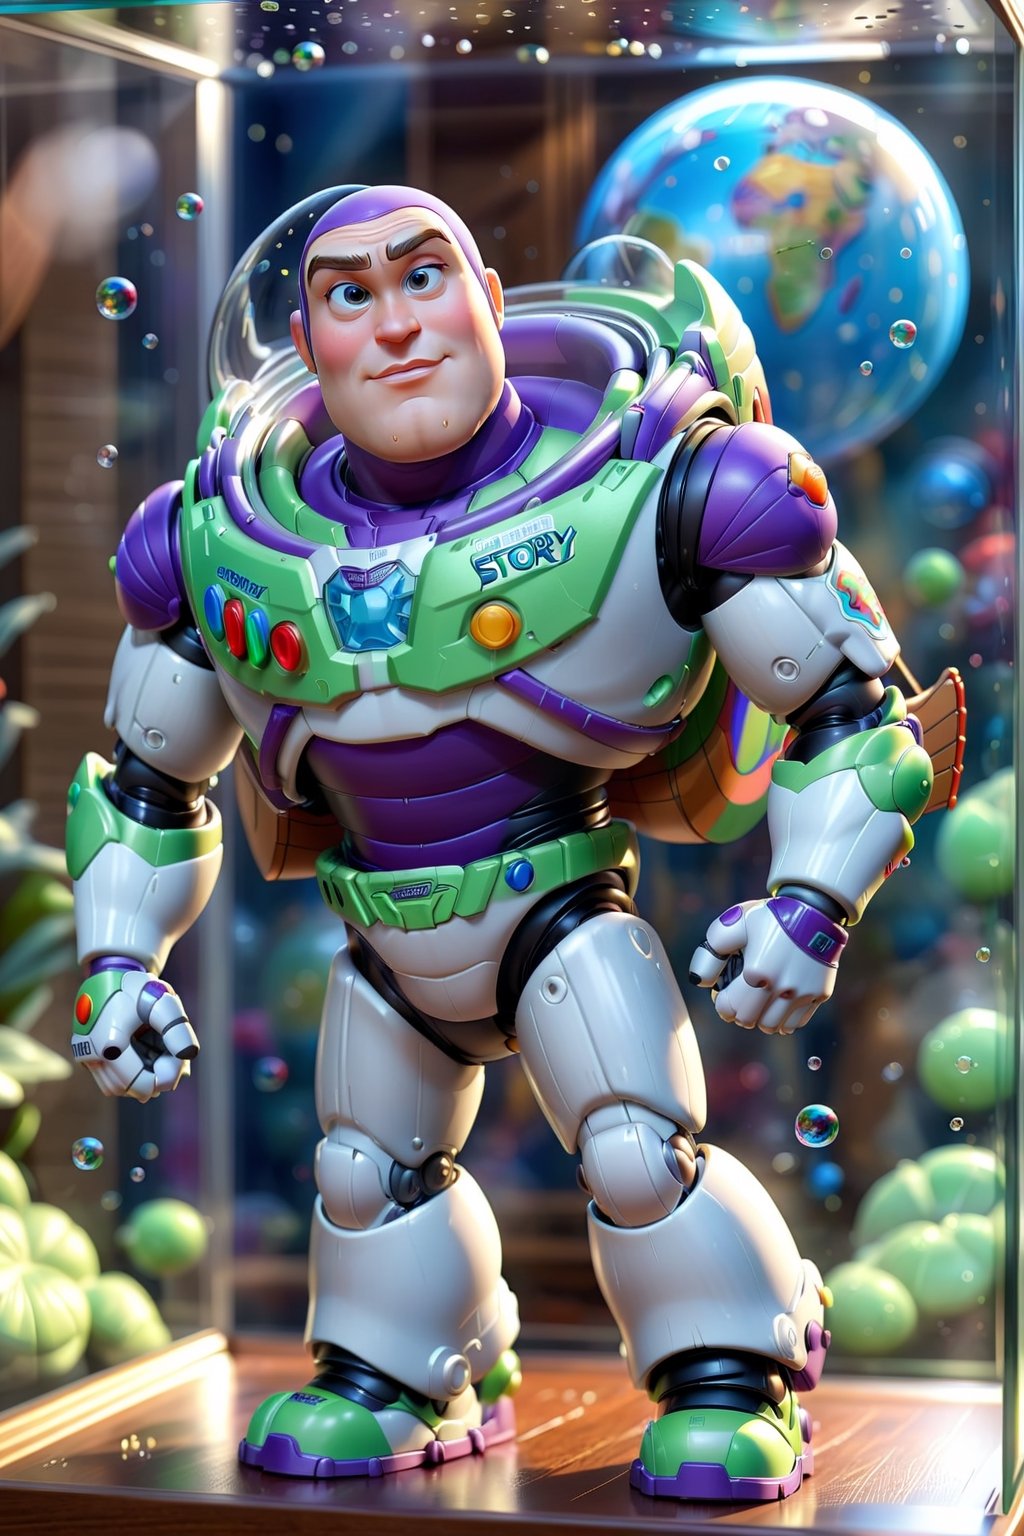 Buzz Lightyear from Toy Story, inside a beautiful display case in an ultra realistic, high definition display
3D,Cartoon,bubbleGL